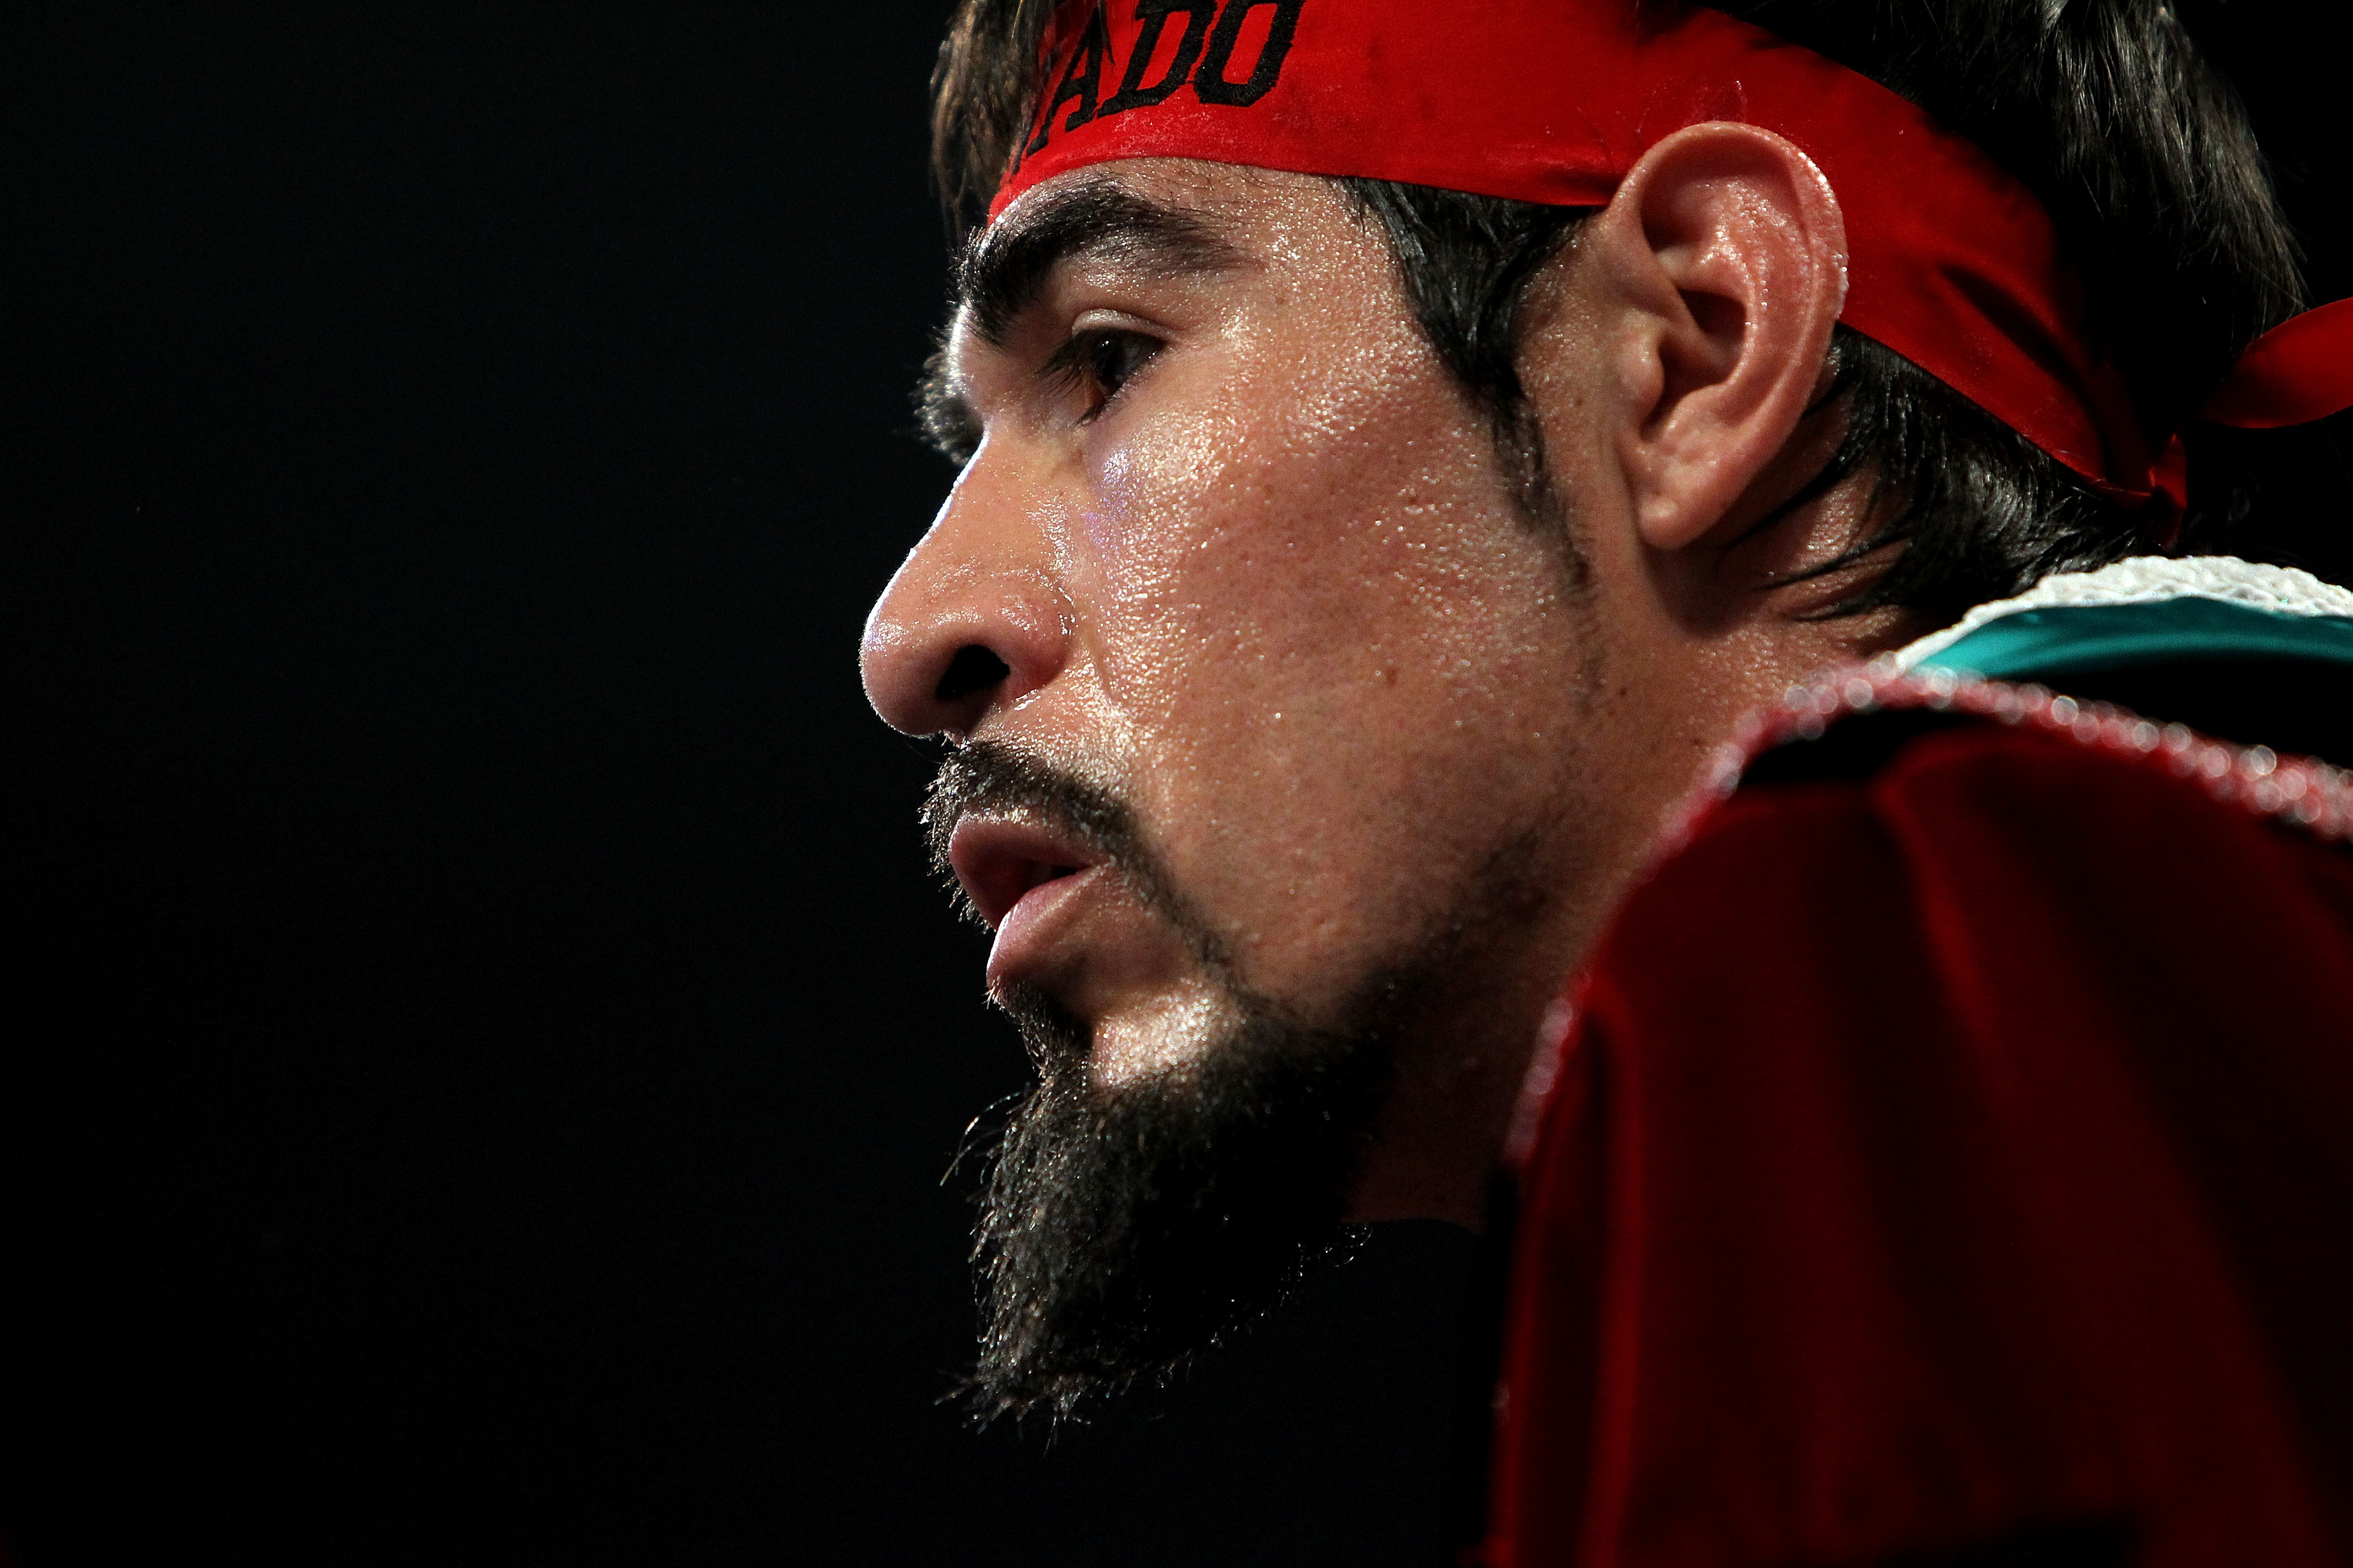 ARLINGTON, TX - NOVEMBER 13:  Antonio Margarito (black trunks) of Mexico looks on from his corner as he waits to fight Manny Pacquiao of the Philippines during their WBC World Super Welterweight Title bout at Cowboys Stadium on November 13, 2010 in Arling